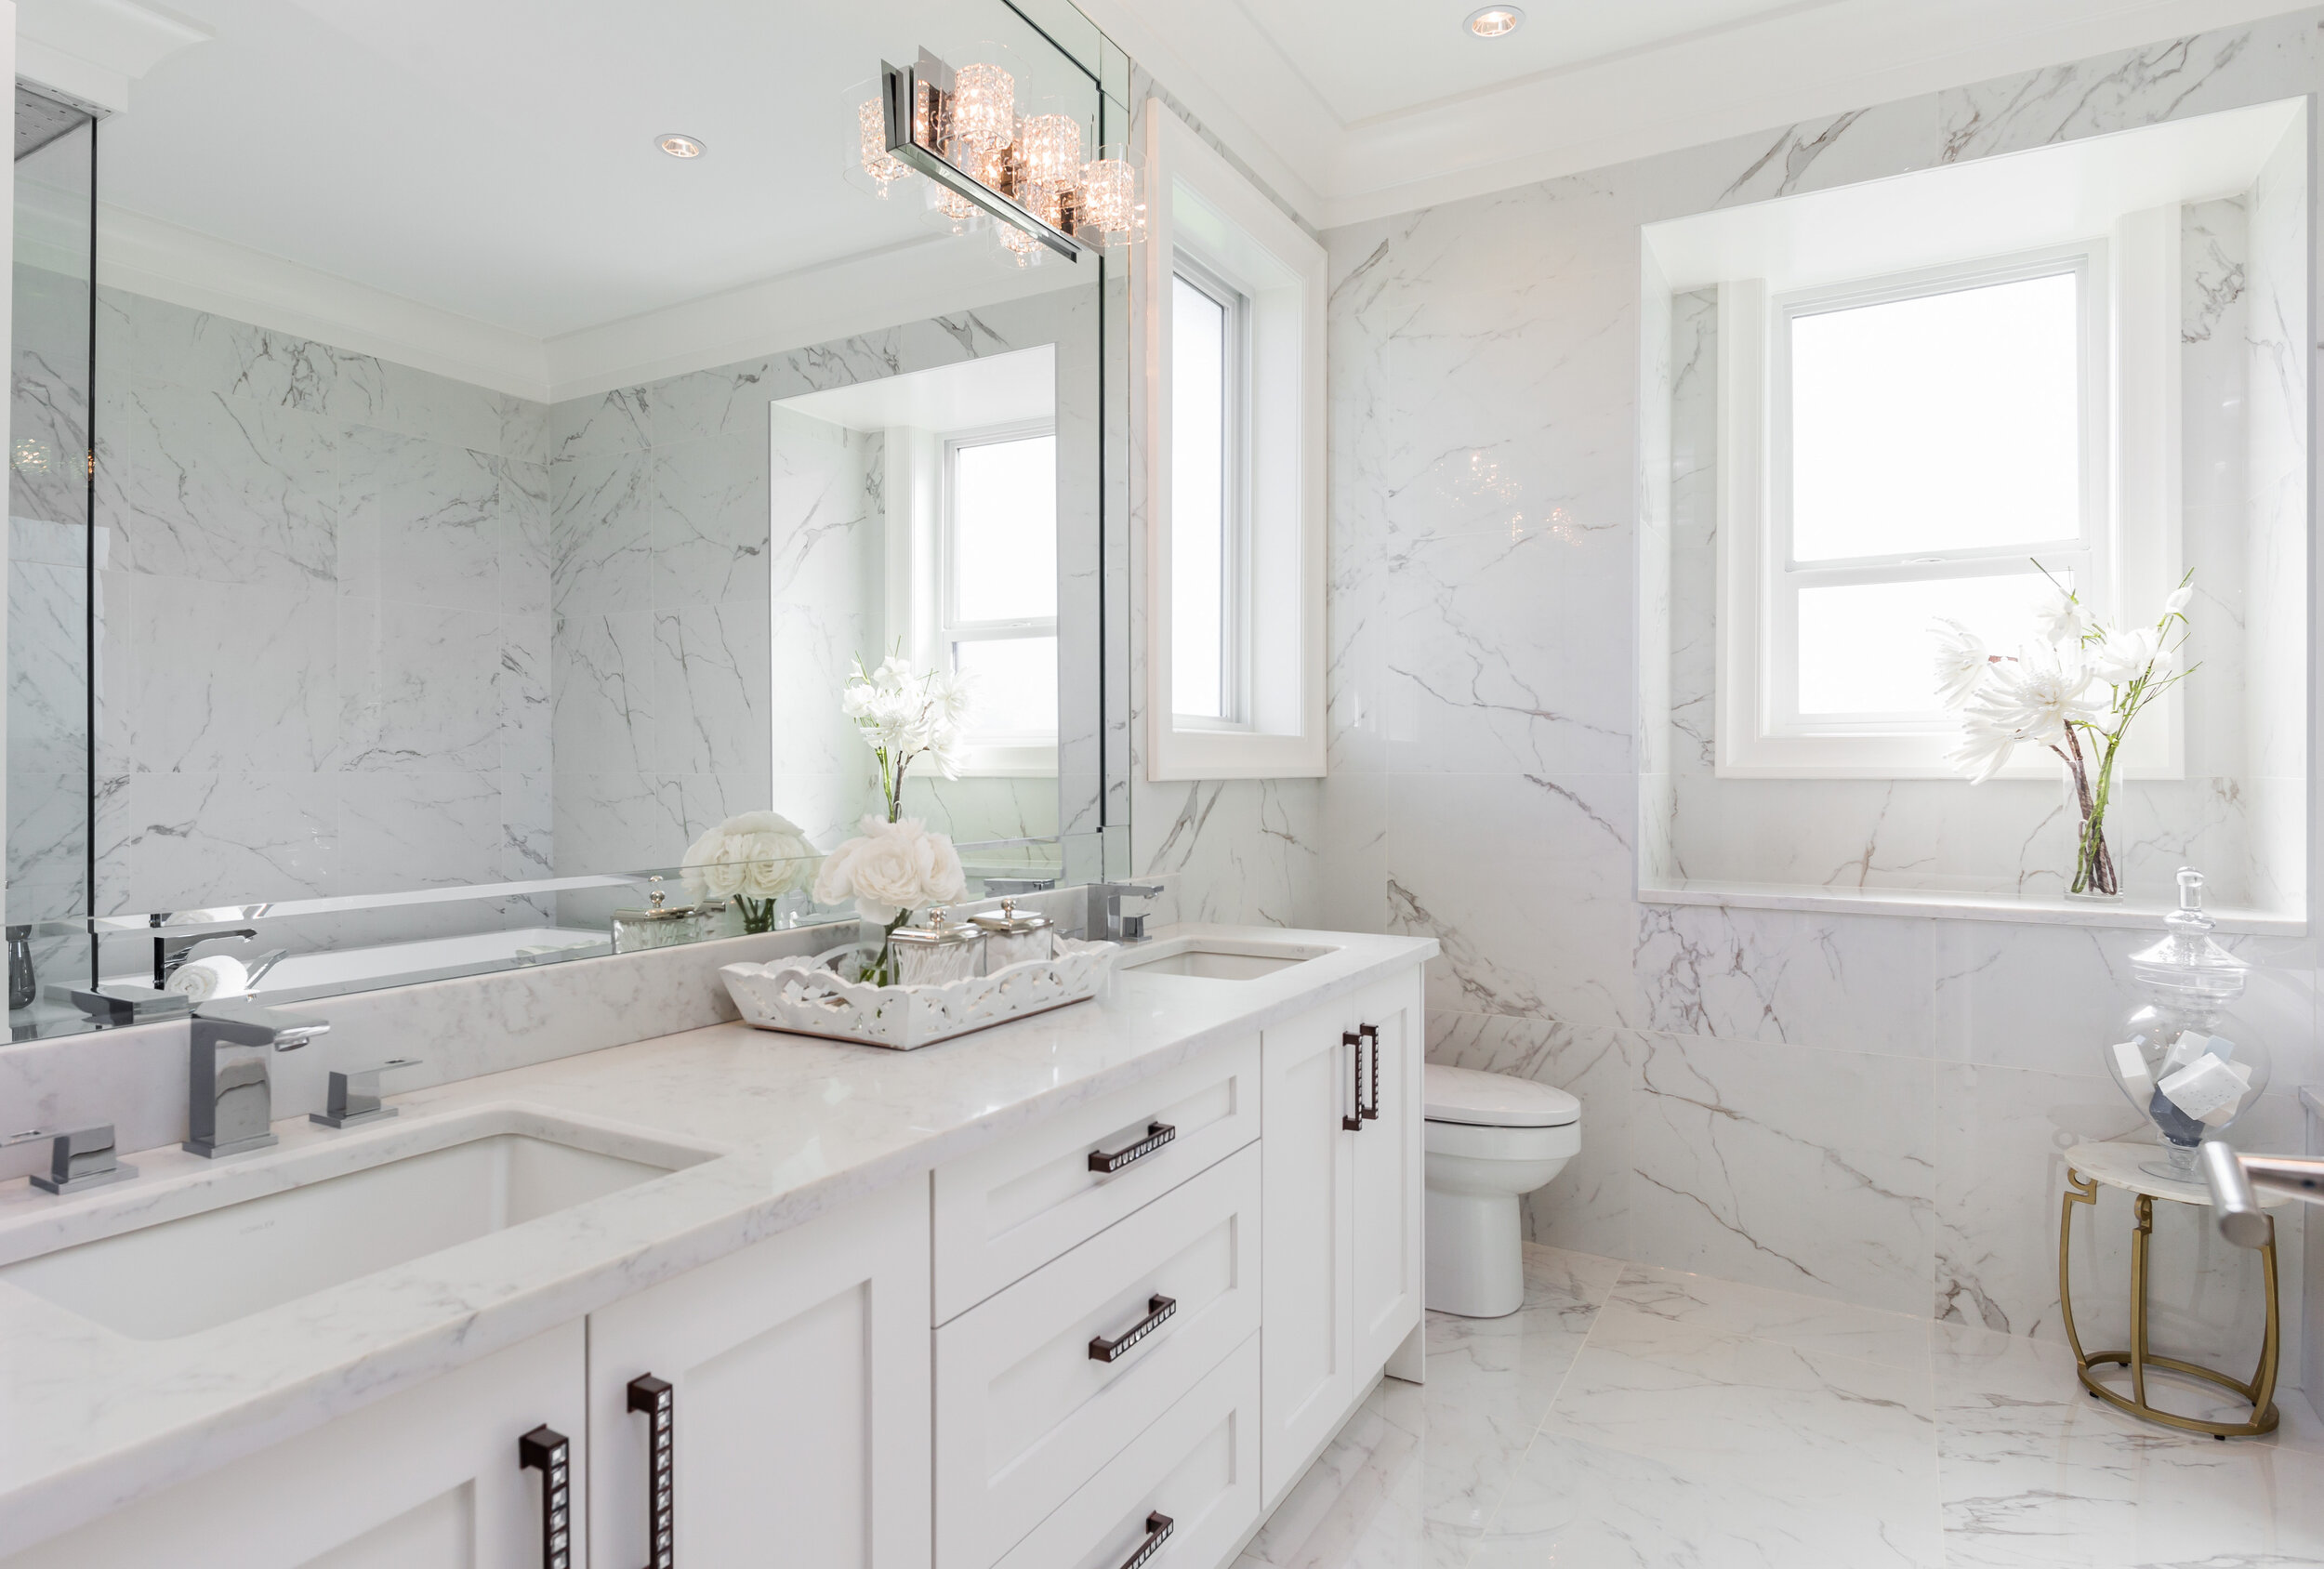 Refreshed this bathroom we staged with botanicals.